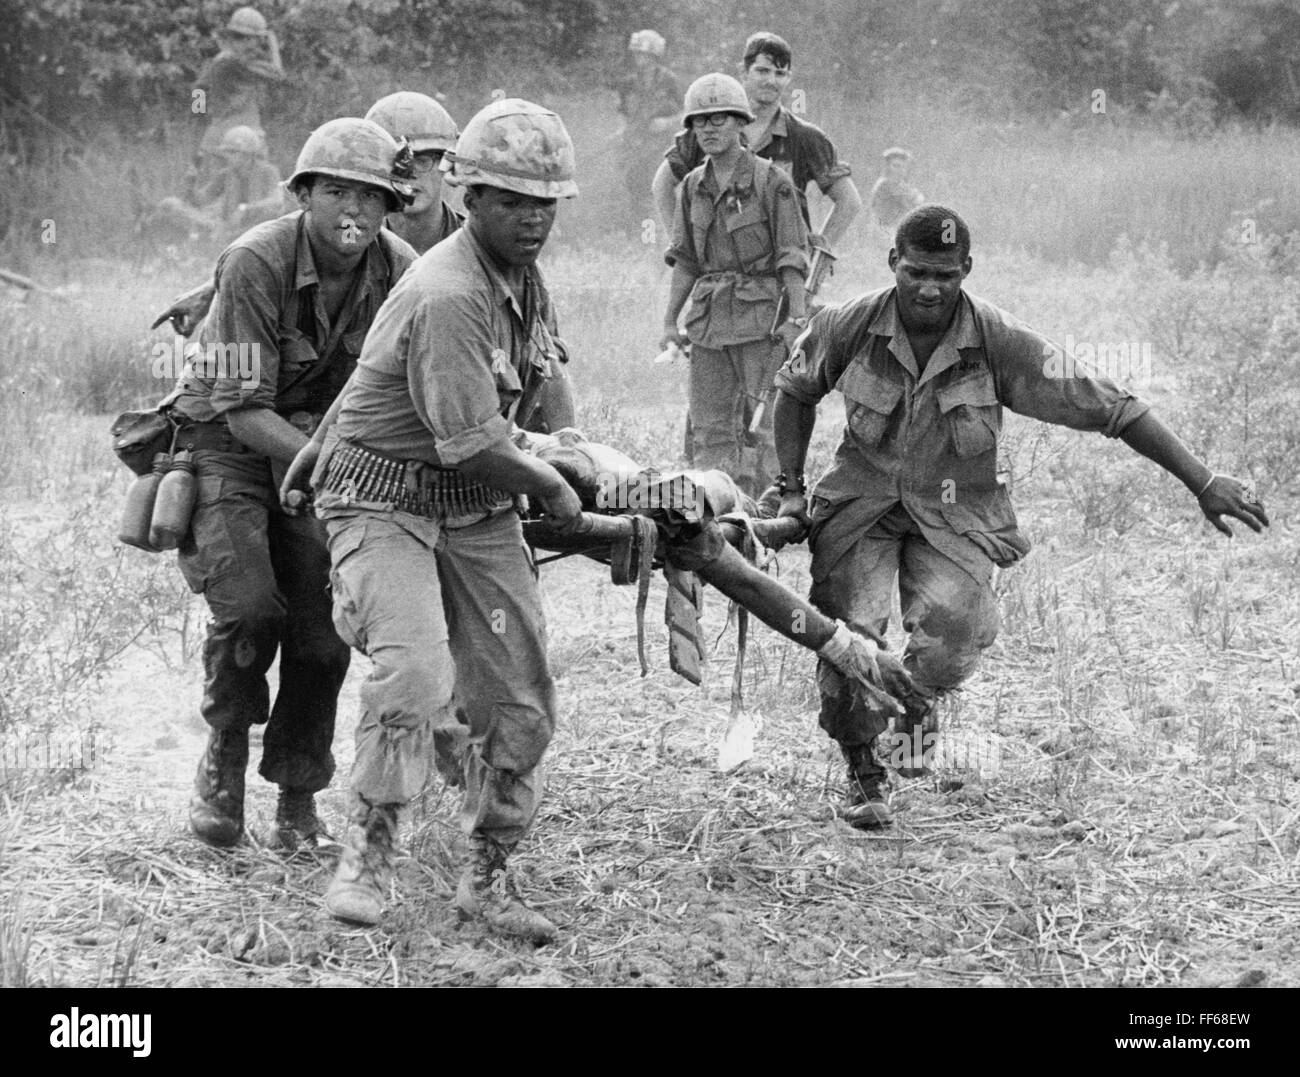 VIETNAM WAR, 1969. /nAn American soldier, wounded by an exploding land mine, carried to a helicopter by his comrades, 1969. Stock Photo